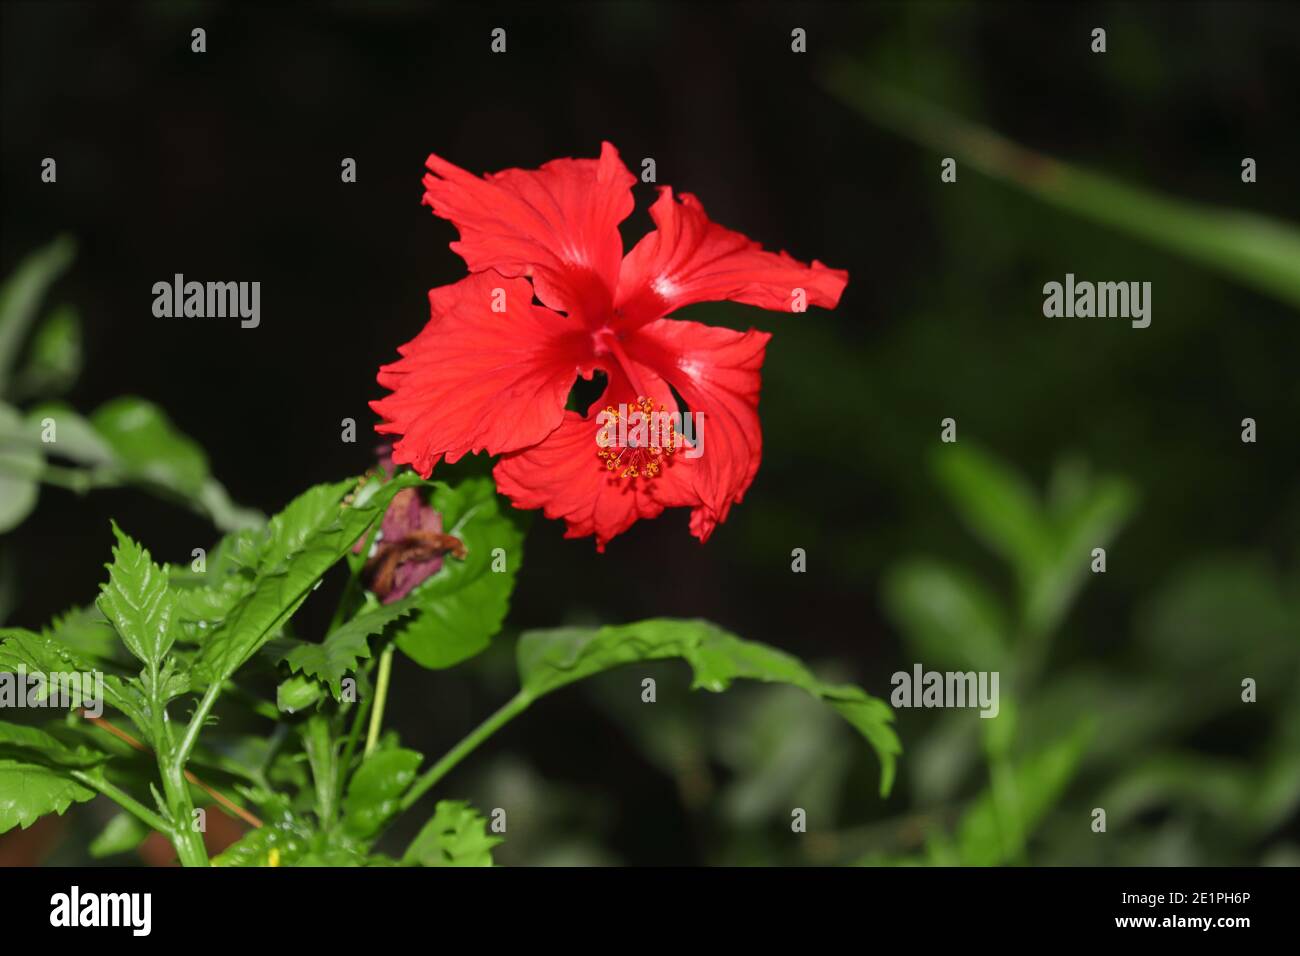 Red hibiscus flower opened in the garden, hibiscus flower royalty free image Stock Photo